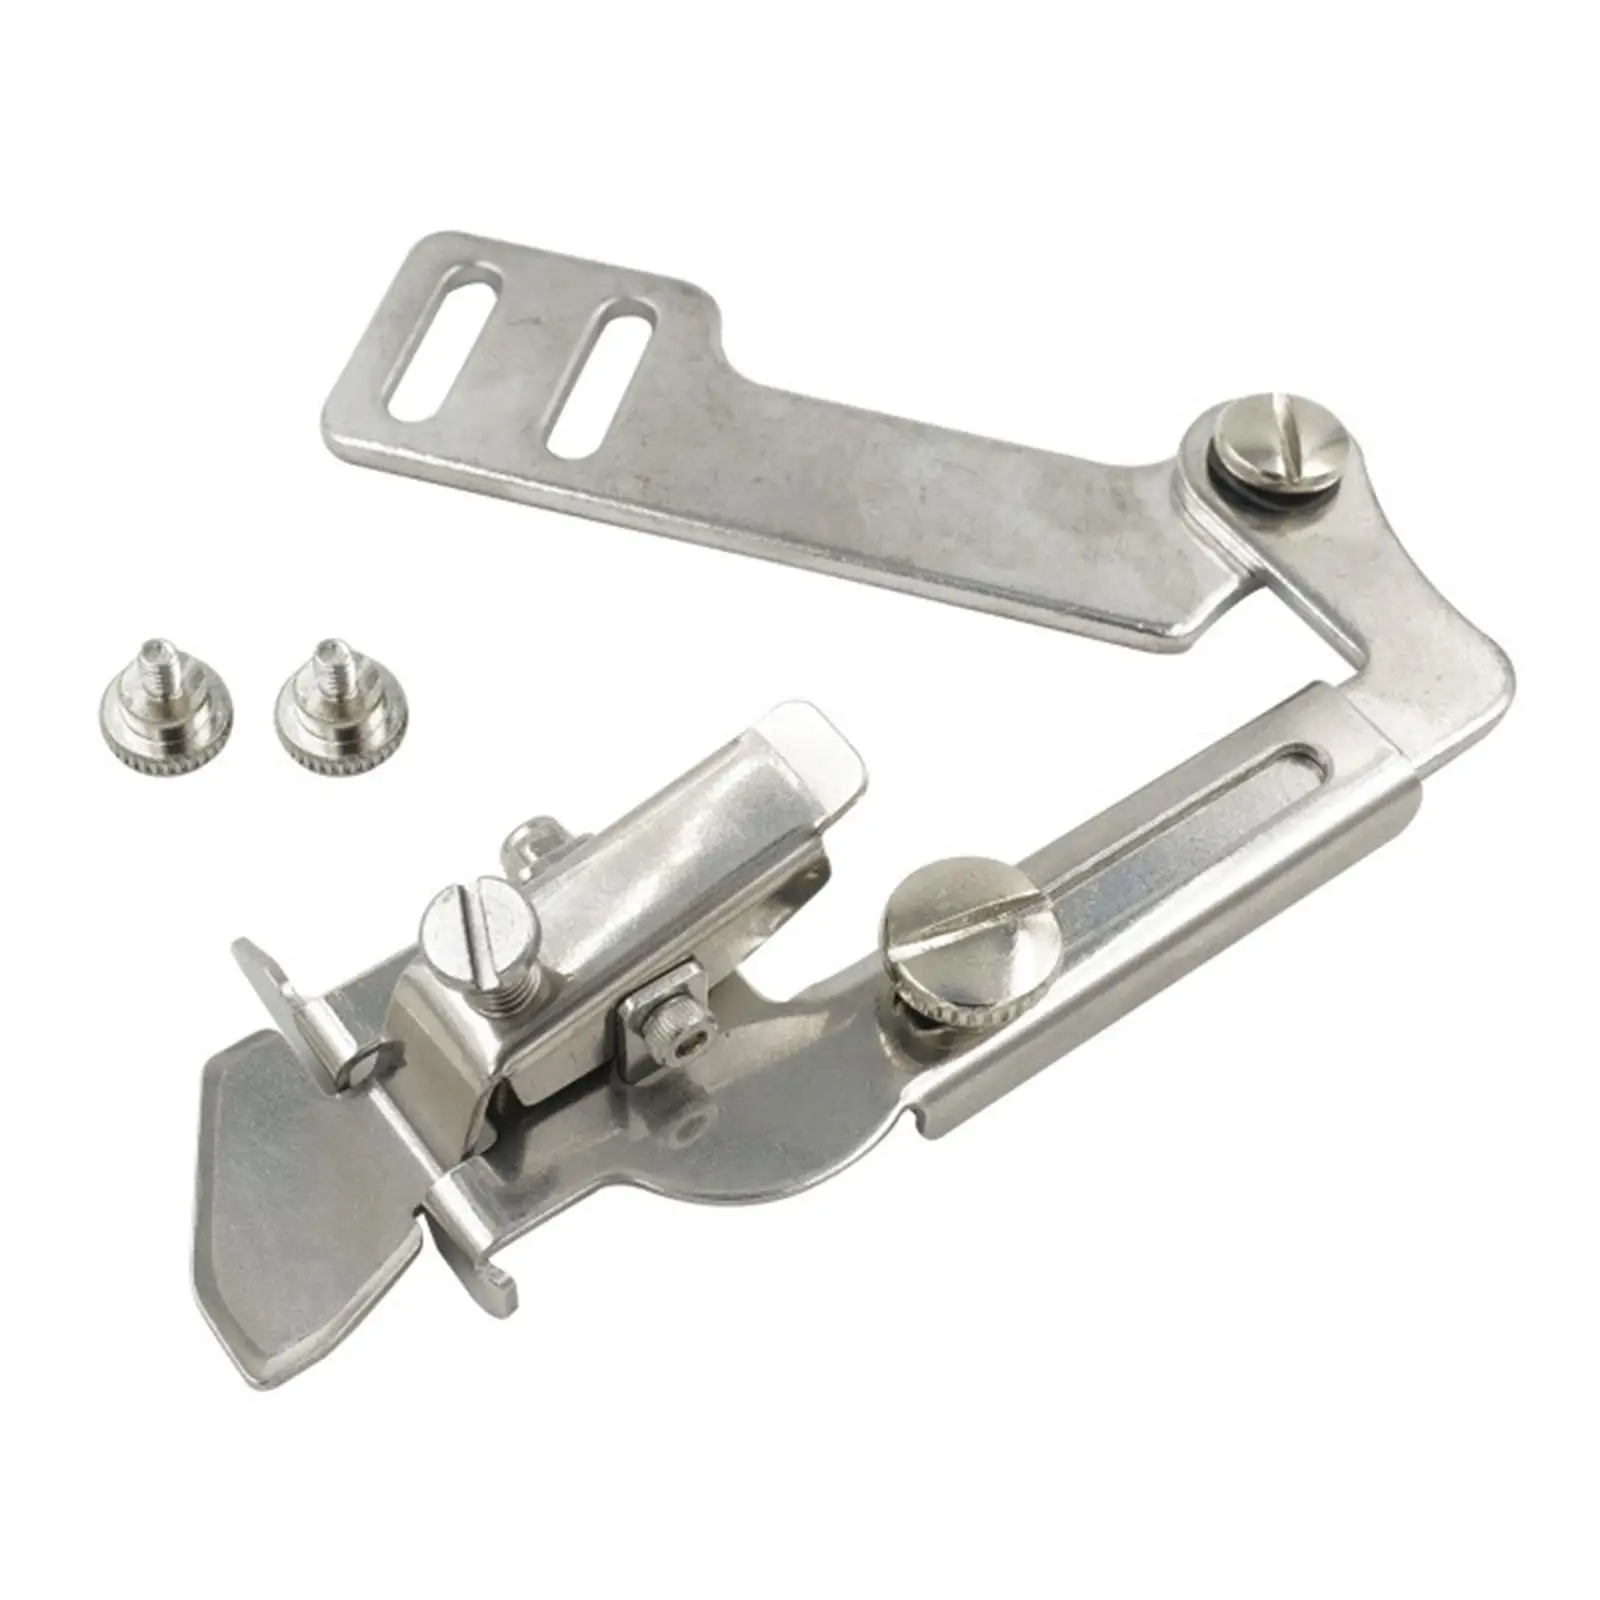 Sewing Machine Presser Foot Industrial Walking Foot Universal Sew Machines Edge Guide Curling Device Quilting Patchwork